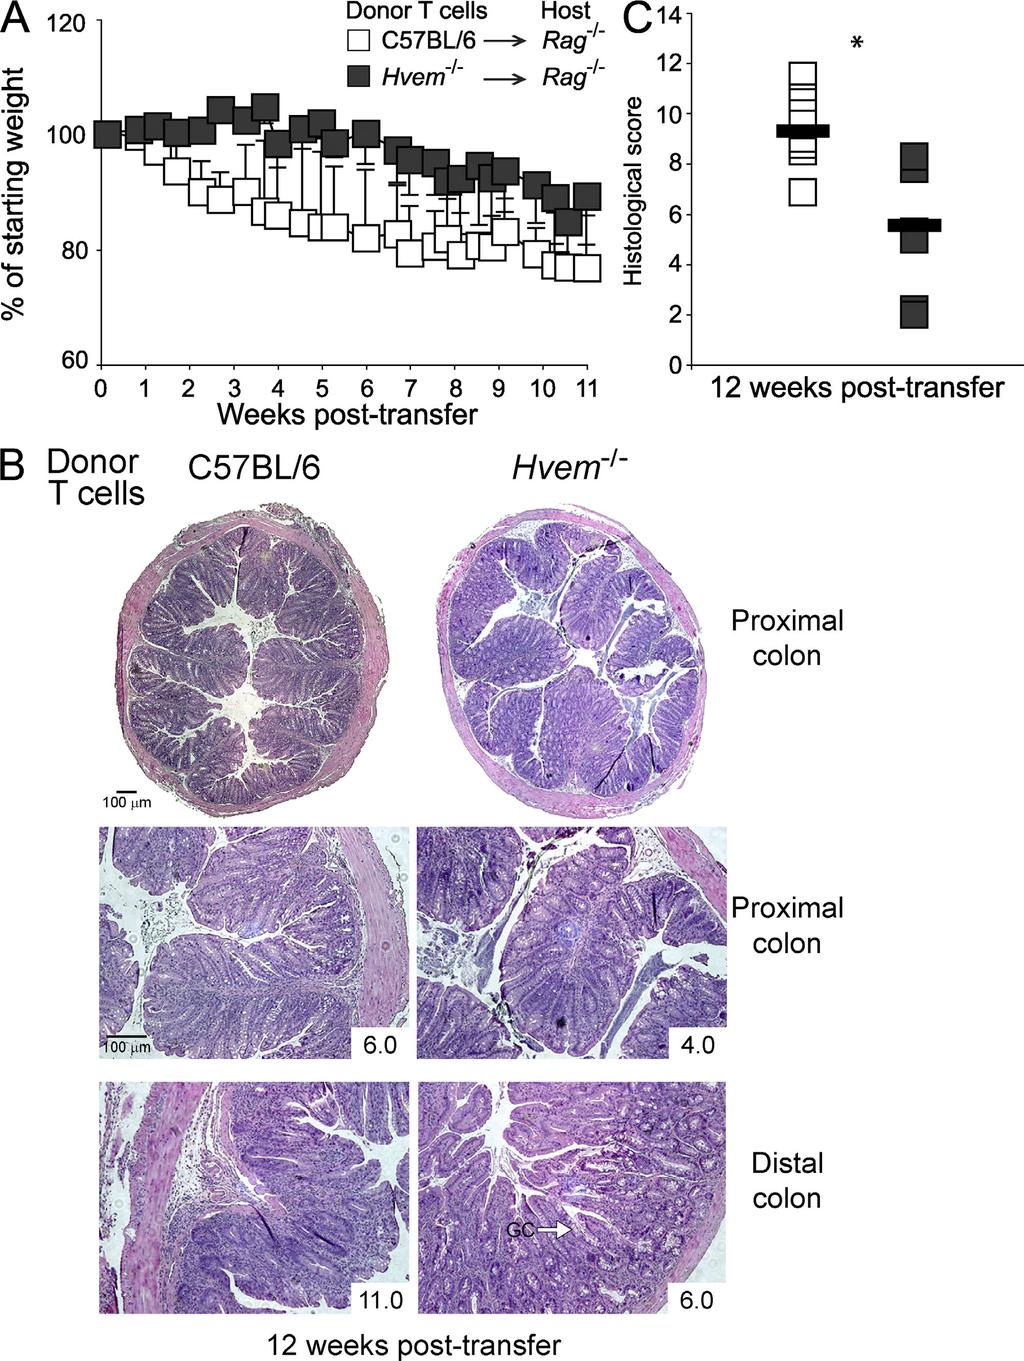 Published June 2, 2008 RESULTS The role of HVEM expression by T cells in colitis induction To investigate the participation of HVEM in colitis pathogenesis, we used an experimental mouse model